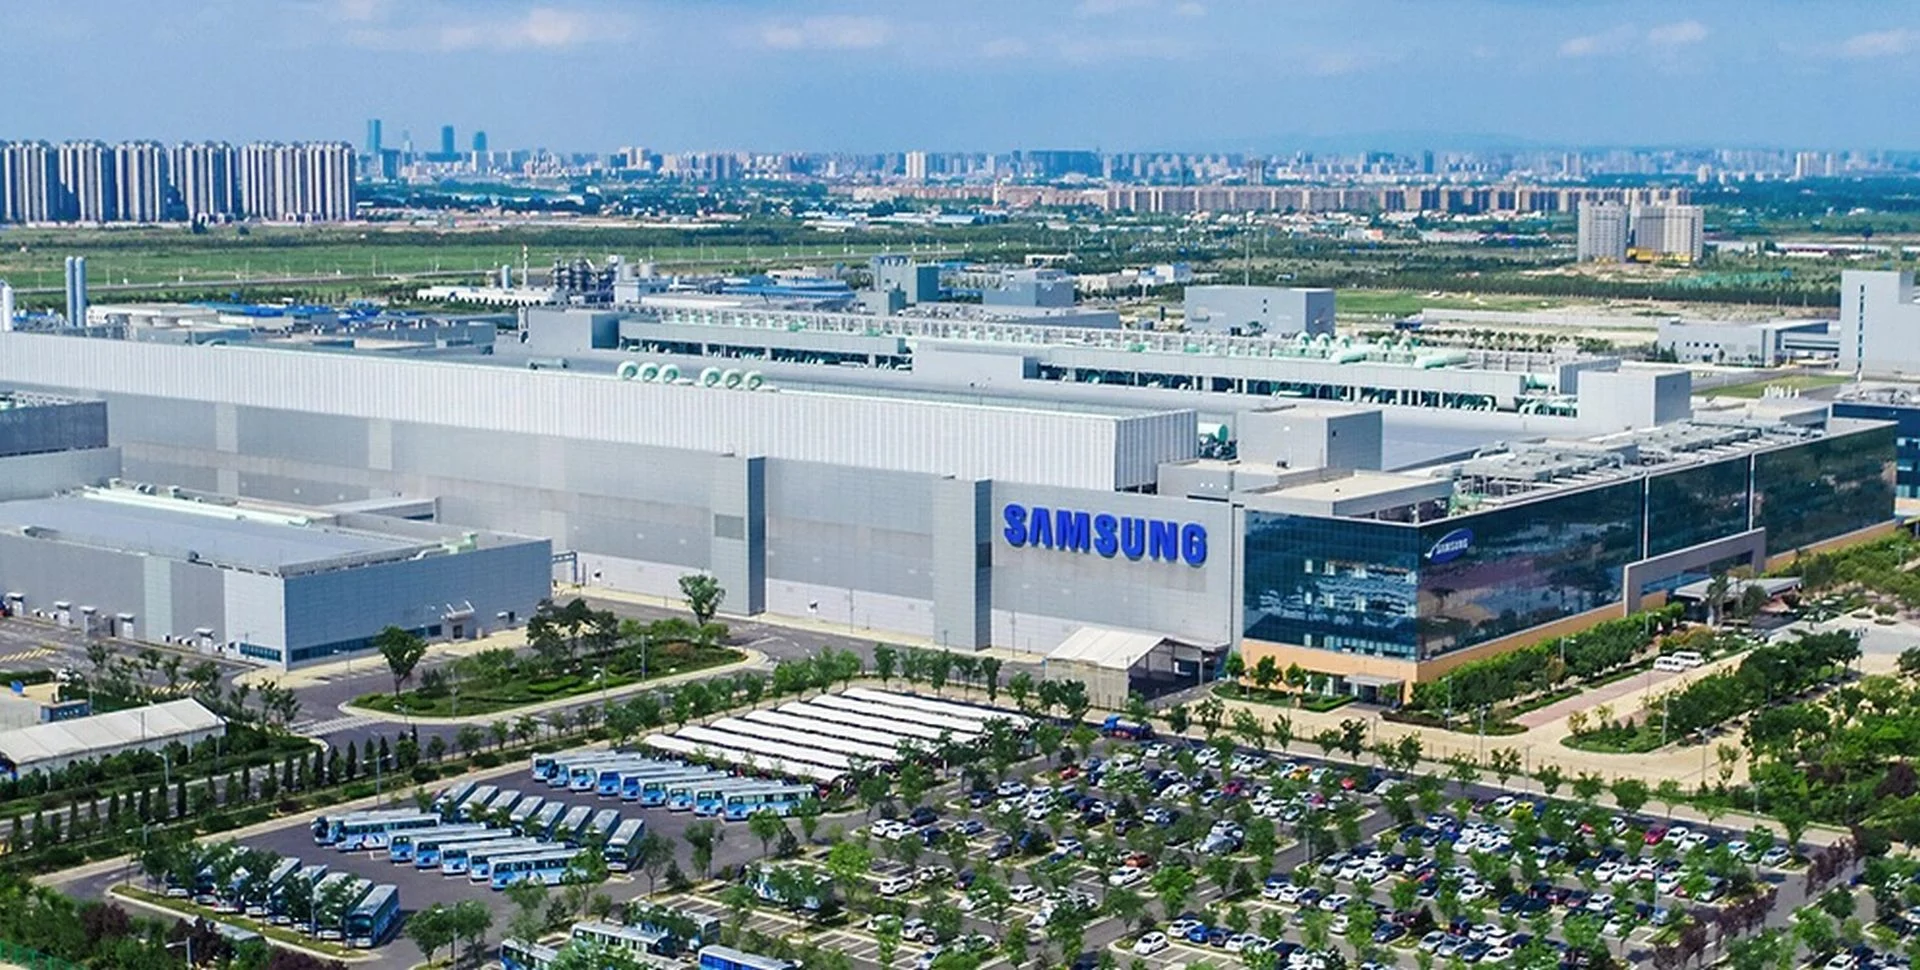 Due to the global fall in customer spending, Samsung has scaled back the production of its devices on a large scale in Vietnam.